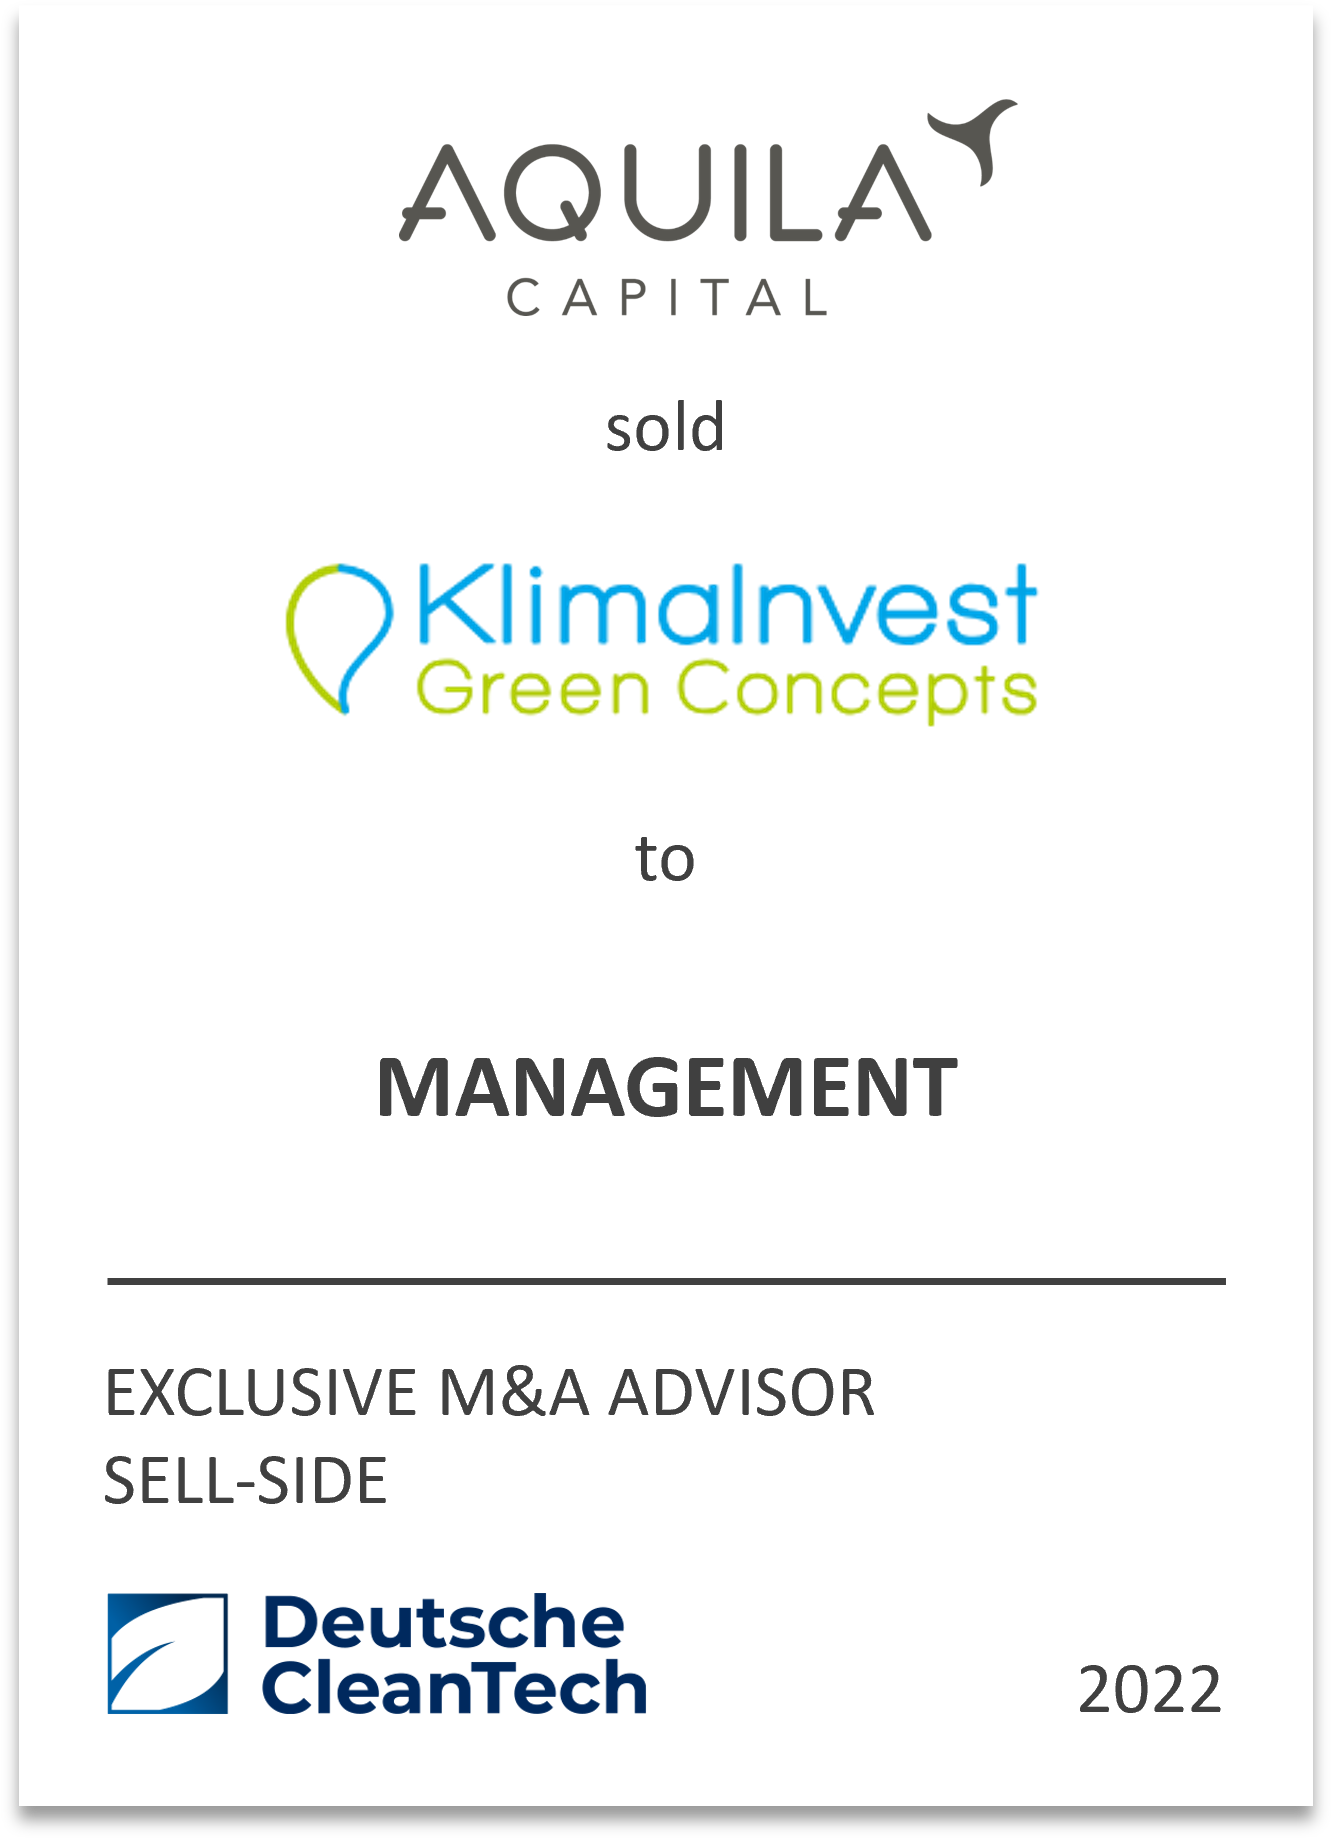 Existing Management acquires KlimaINVEST Holding GmbH & CO KGaA from Aquila Capital Investmentgesellschaft GmbH